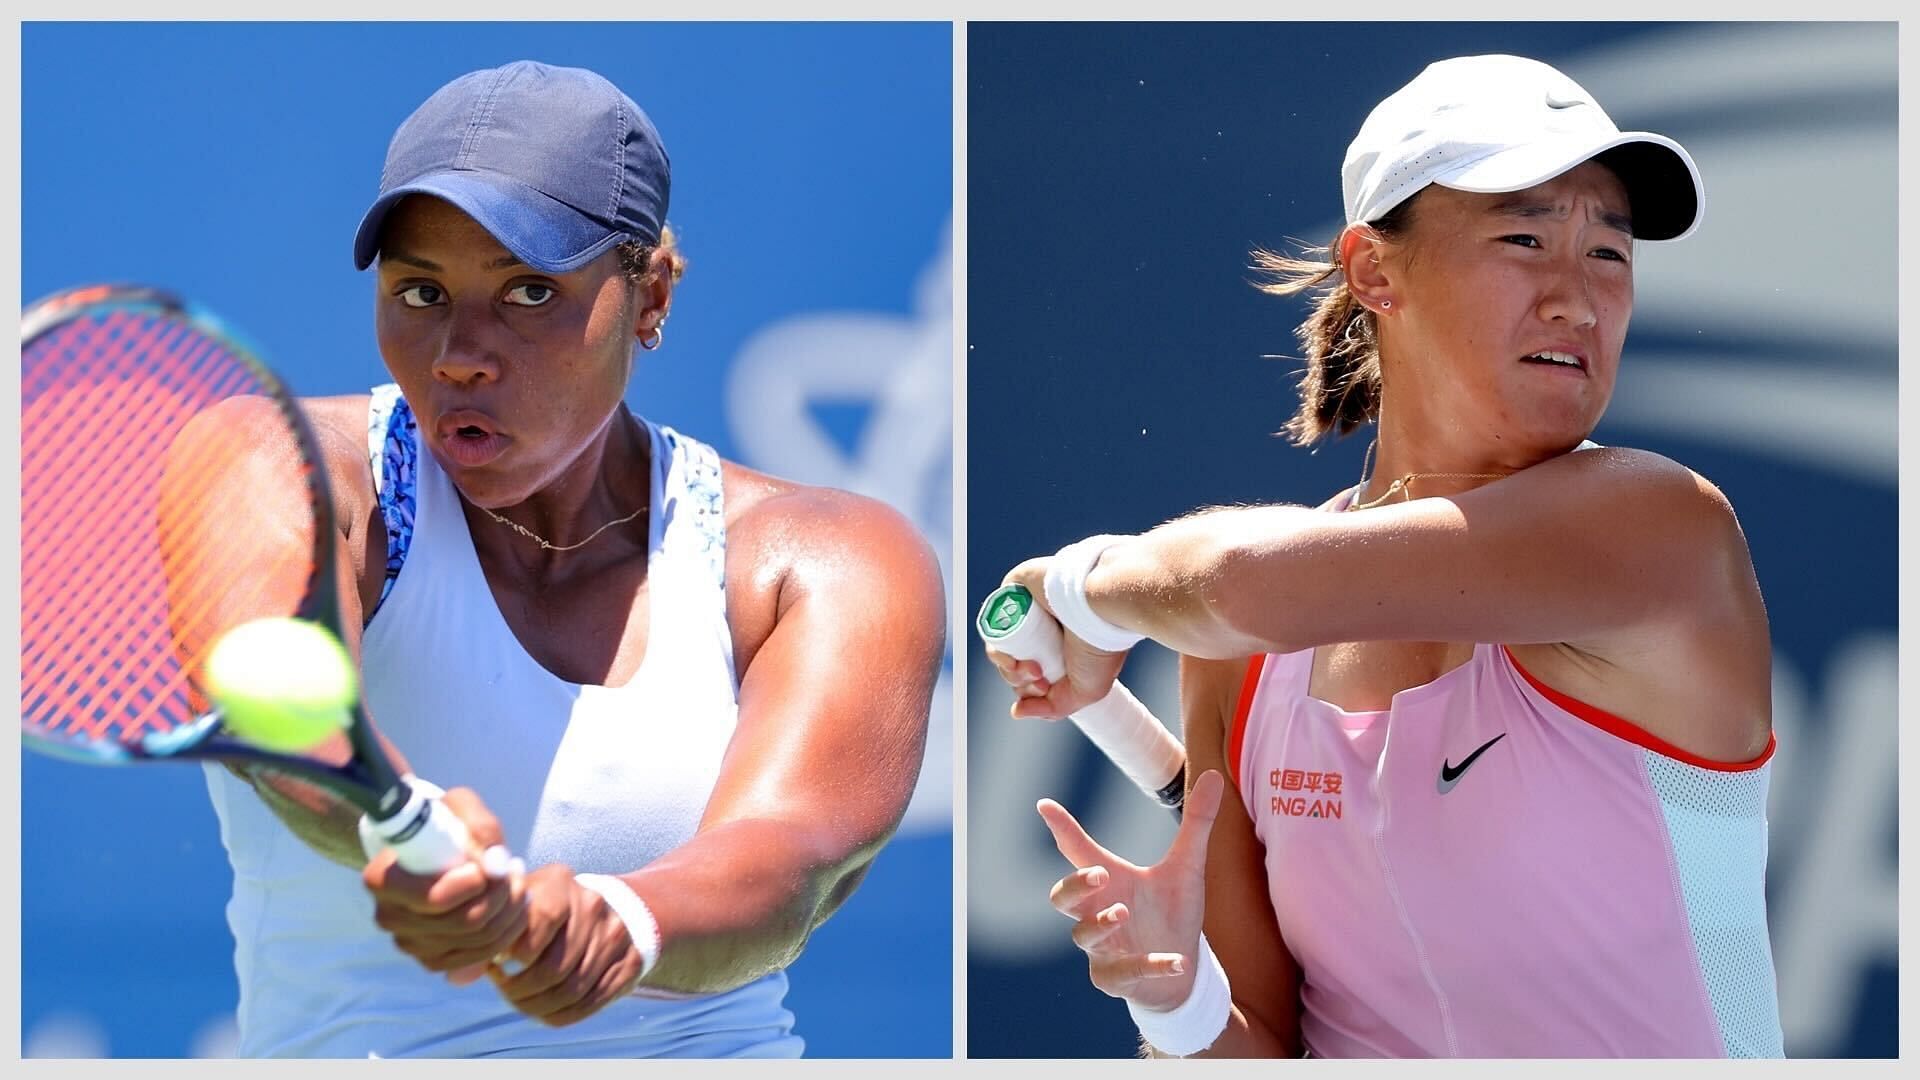 Taylor Townsend vs Wang Xiyu is one of the third round matches at the 2023 Italian Open.